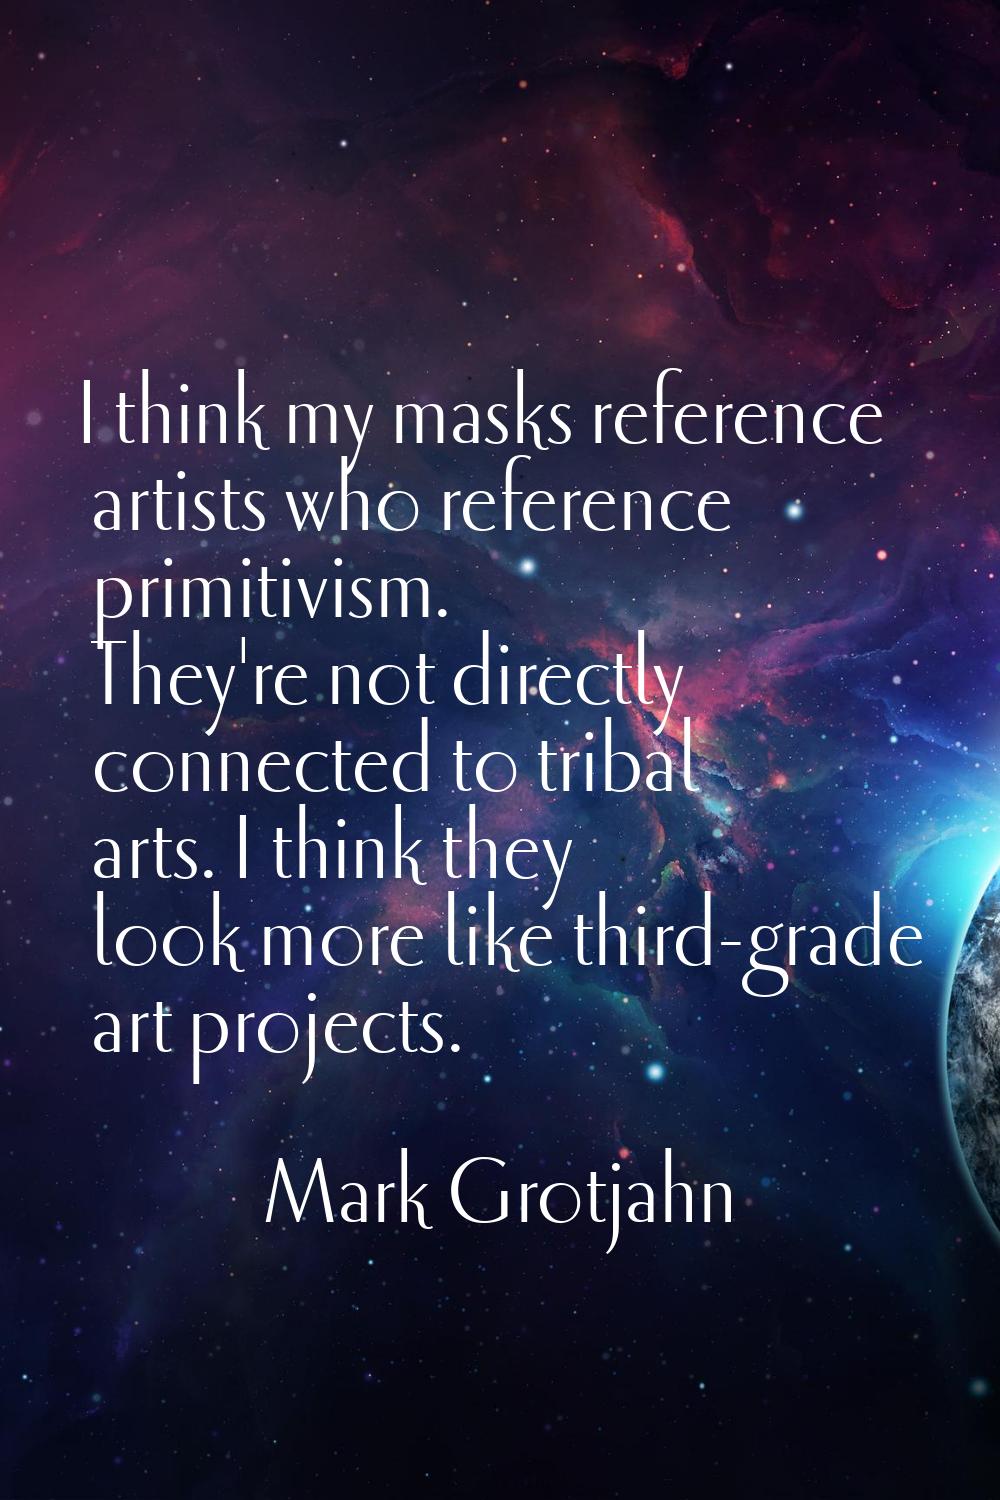 I think my masks reference artists who reference primitivism. They're not directly connected to tri